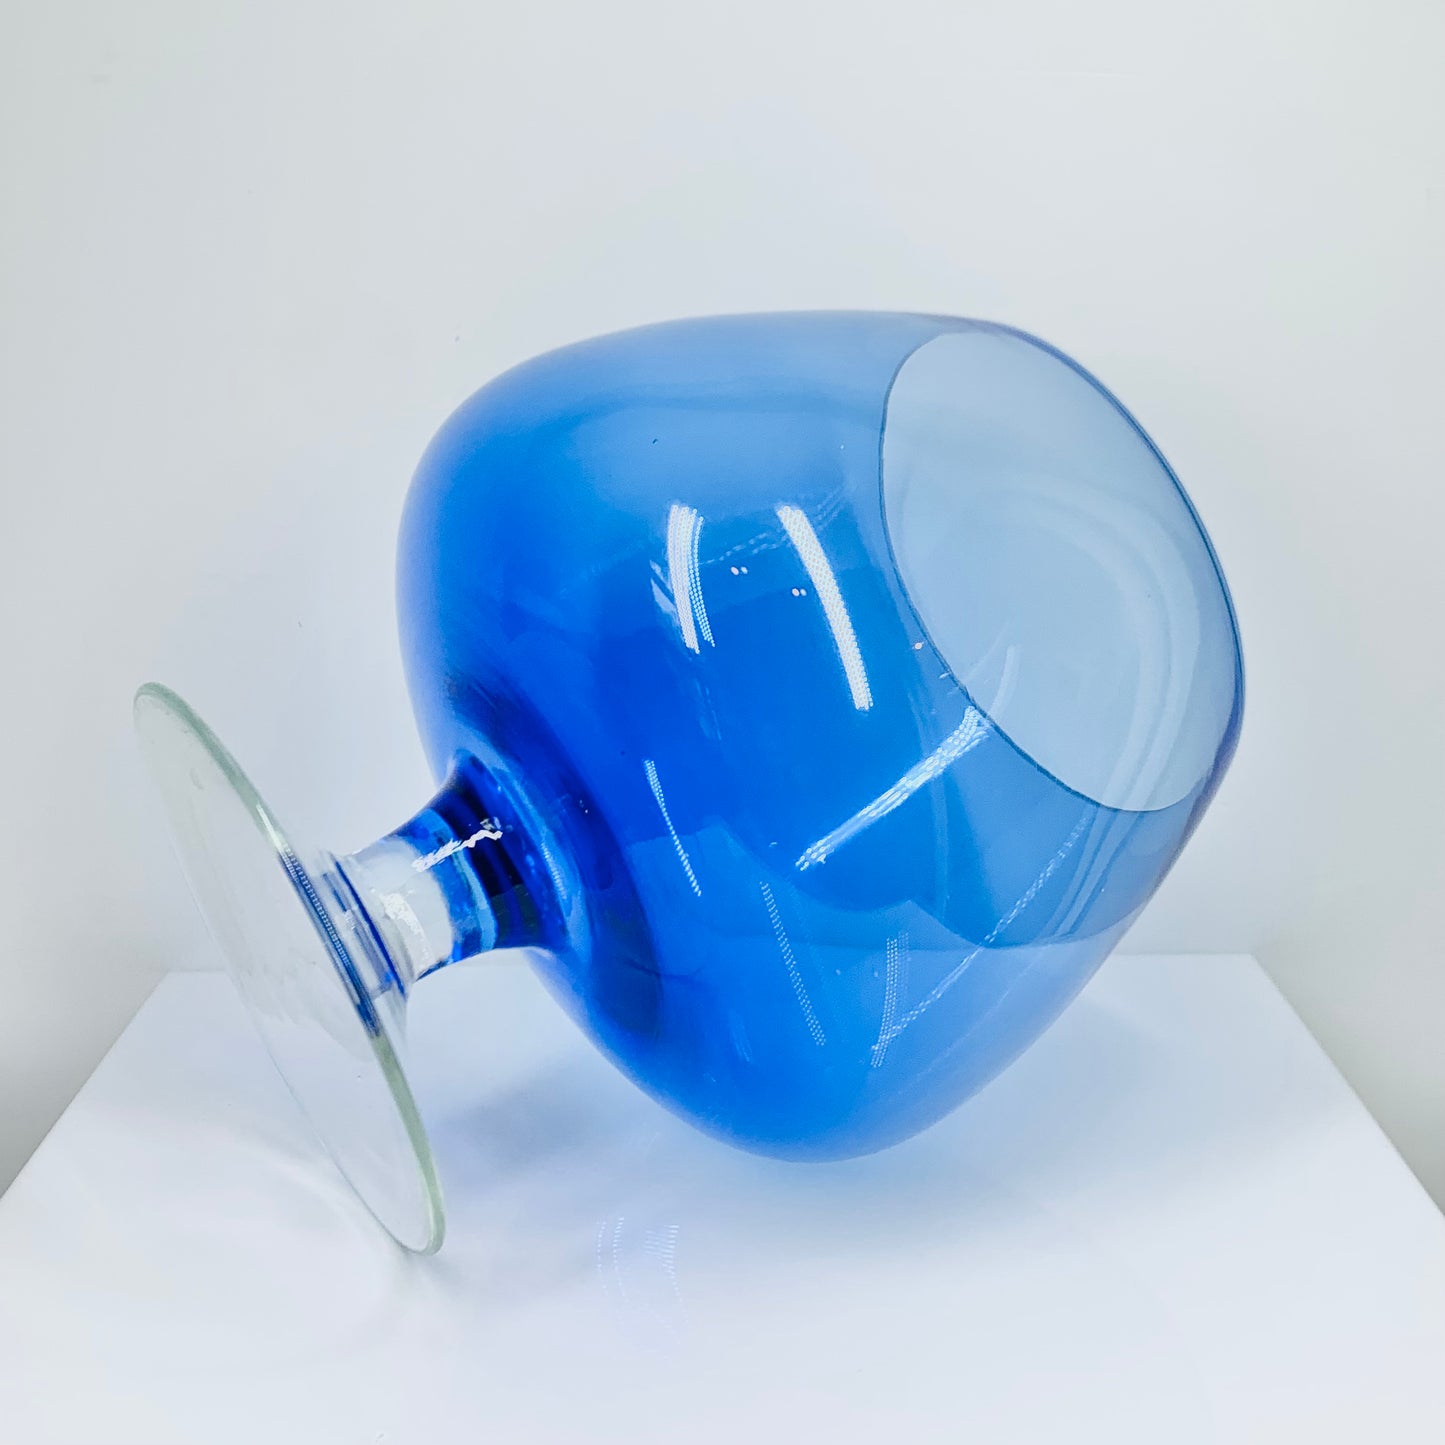 Large Midcentury Italian blue glass brandy balloon vase with clear stem